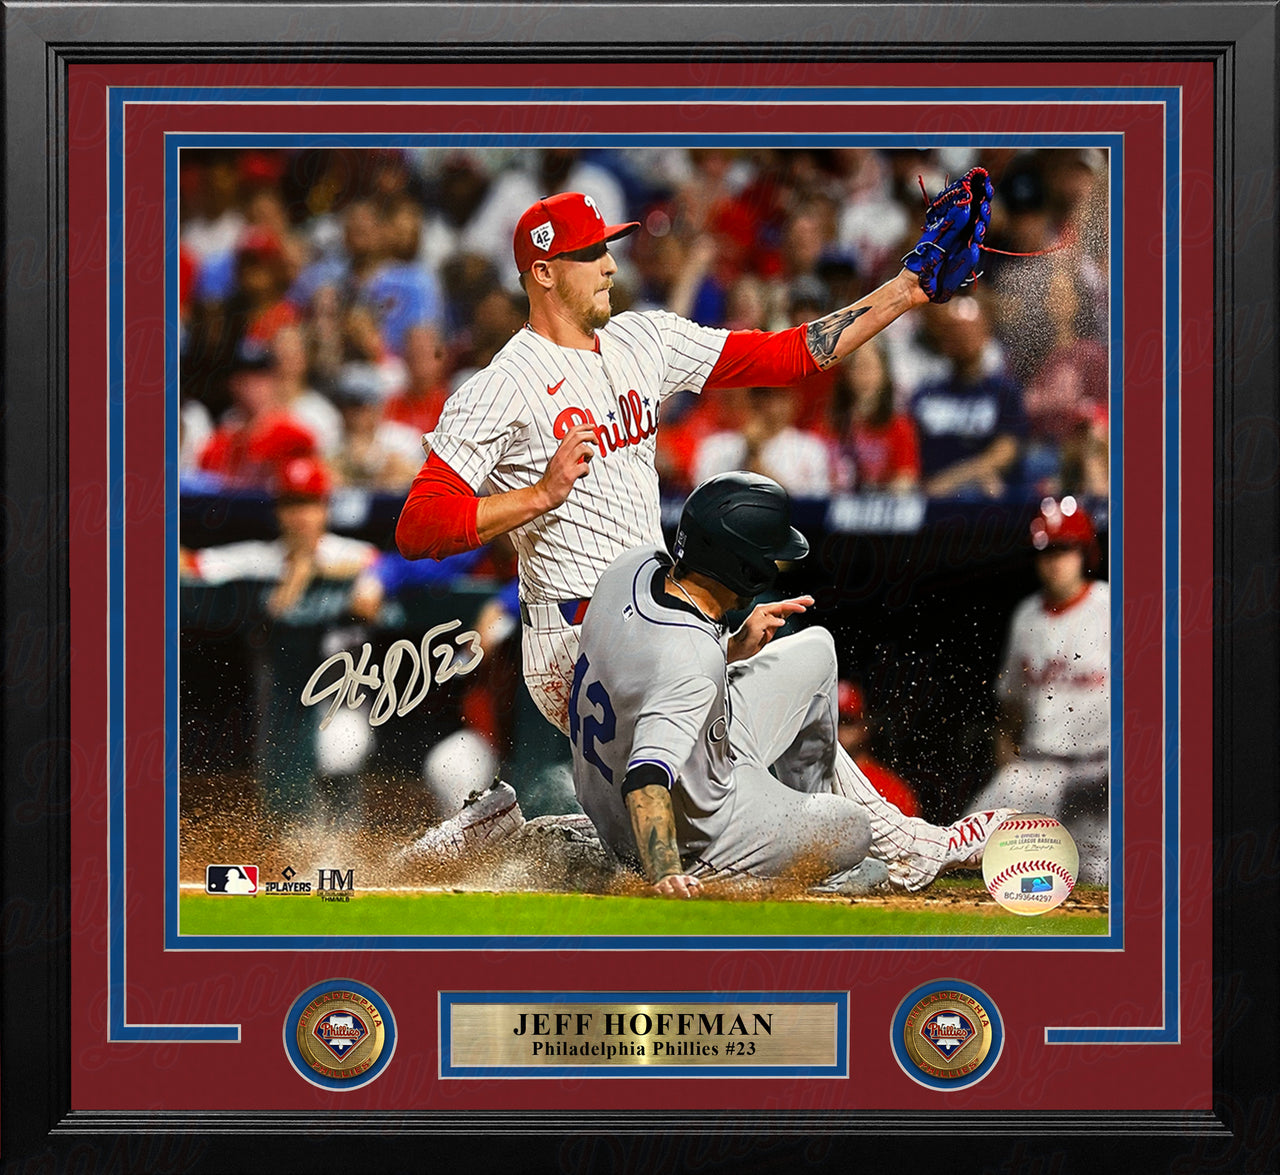 Jeff Hoffman Play at the Plate Philadelphia Phillies Autographed 11" x 14" Framed Baseball Photo